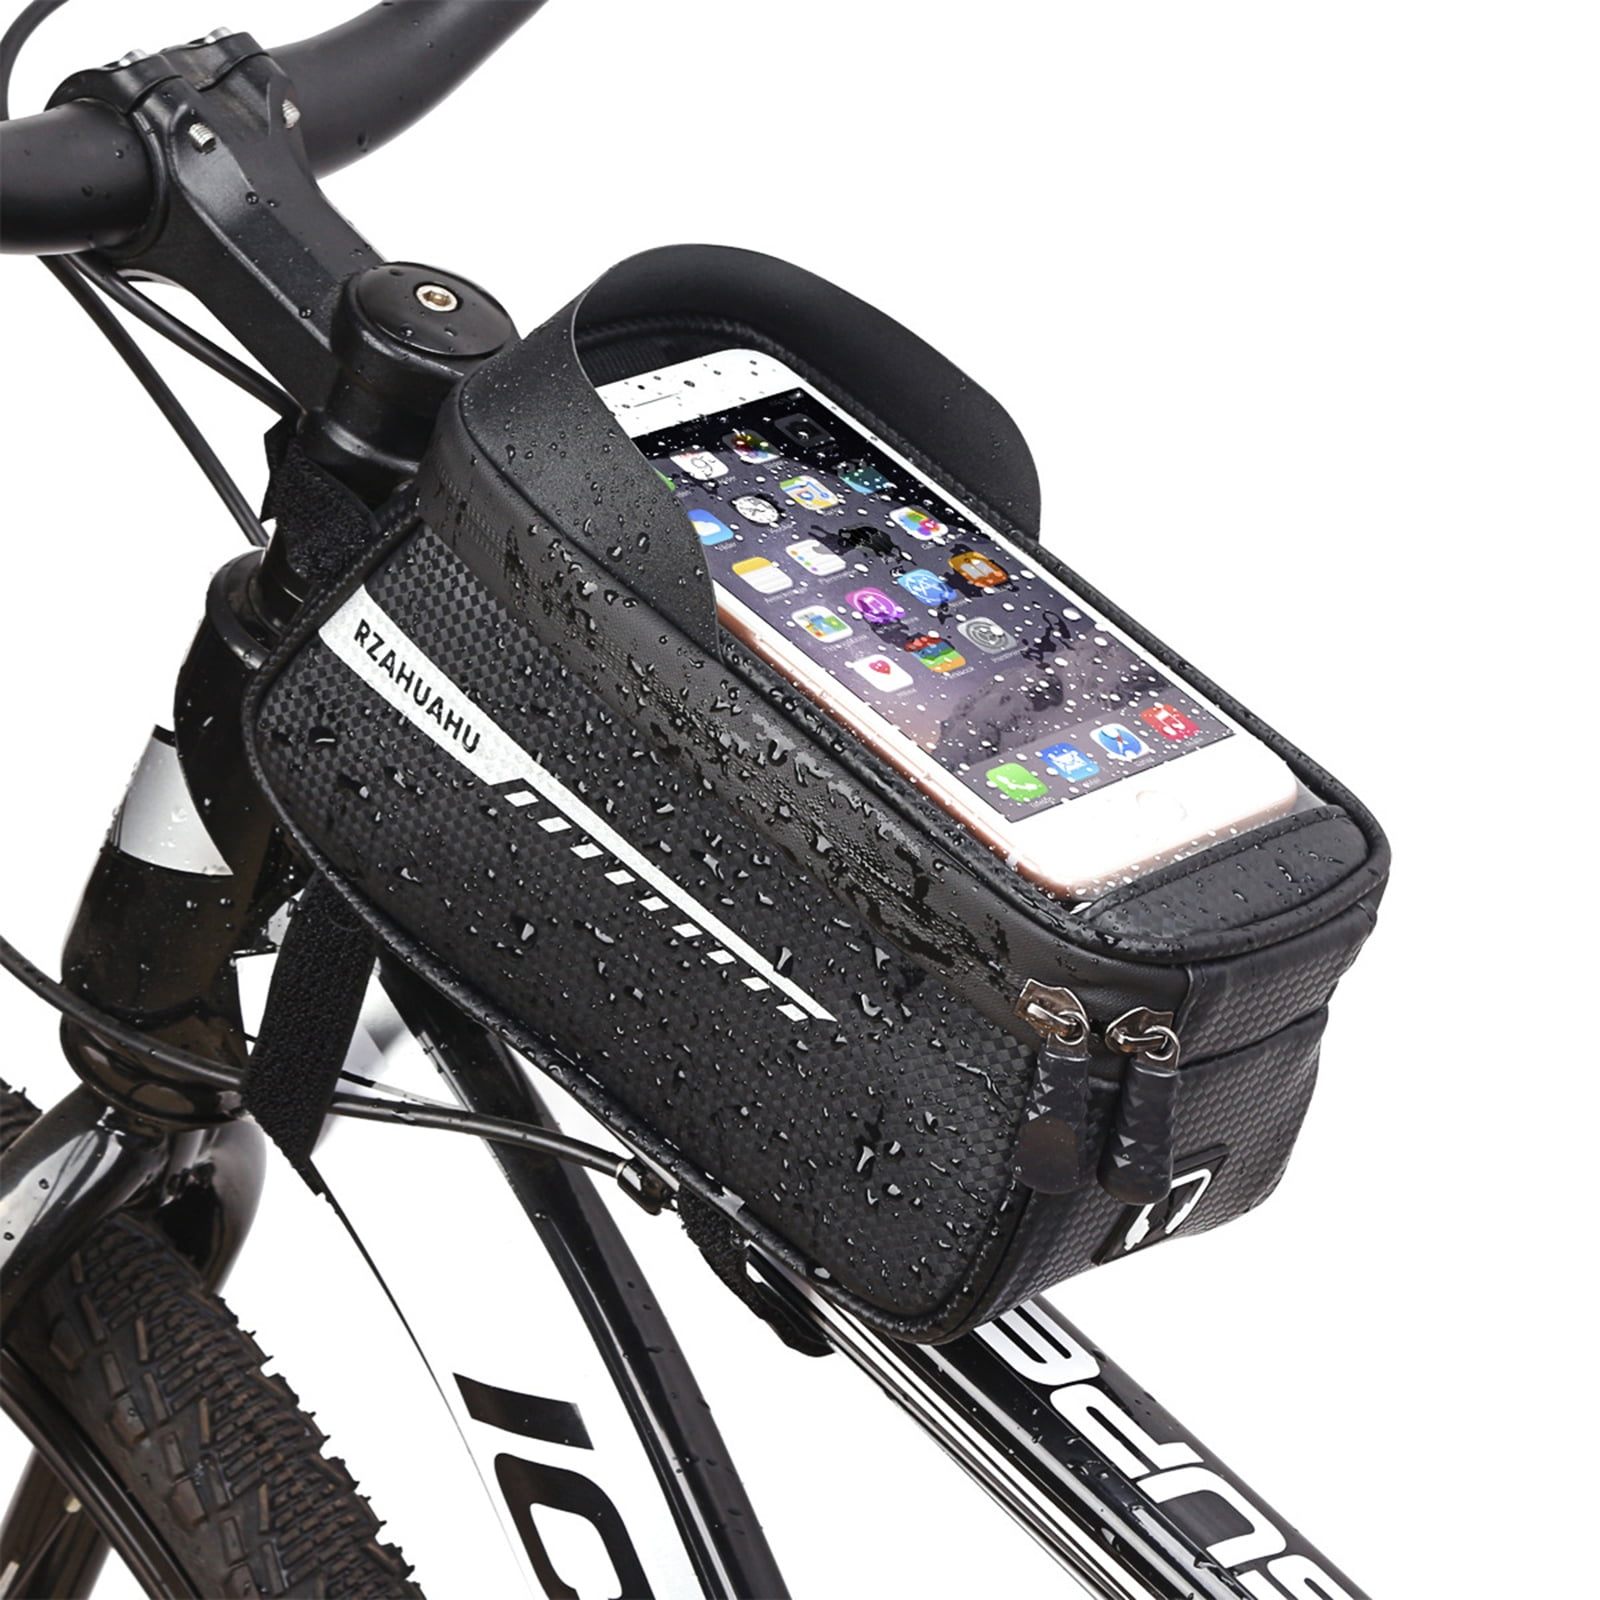 Details about   From Road Bike Top Tube Handlebar Support Sleeves Cycling Bag for Mobile Phone show original title 